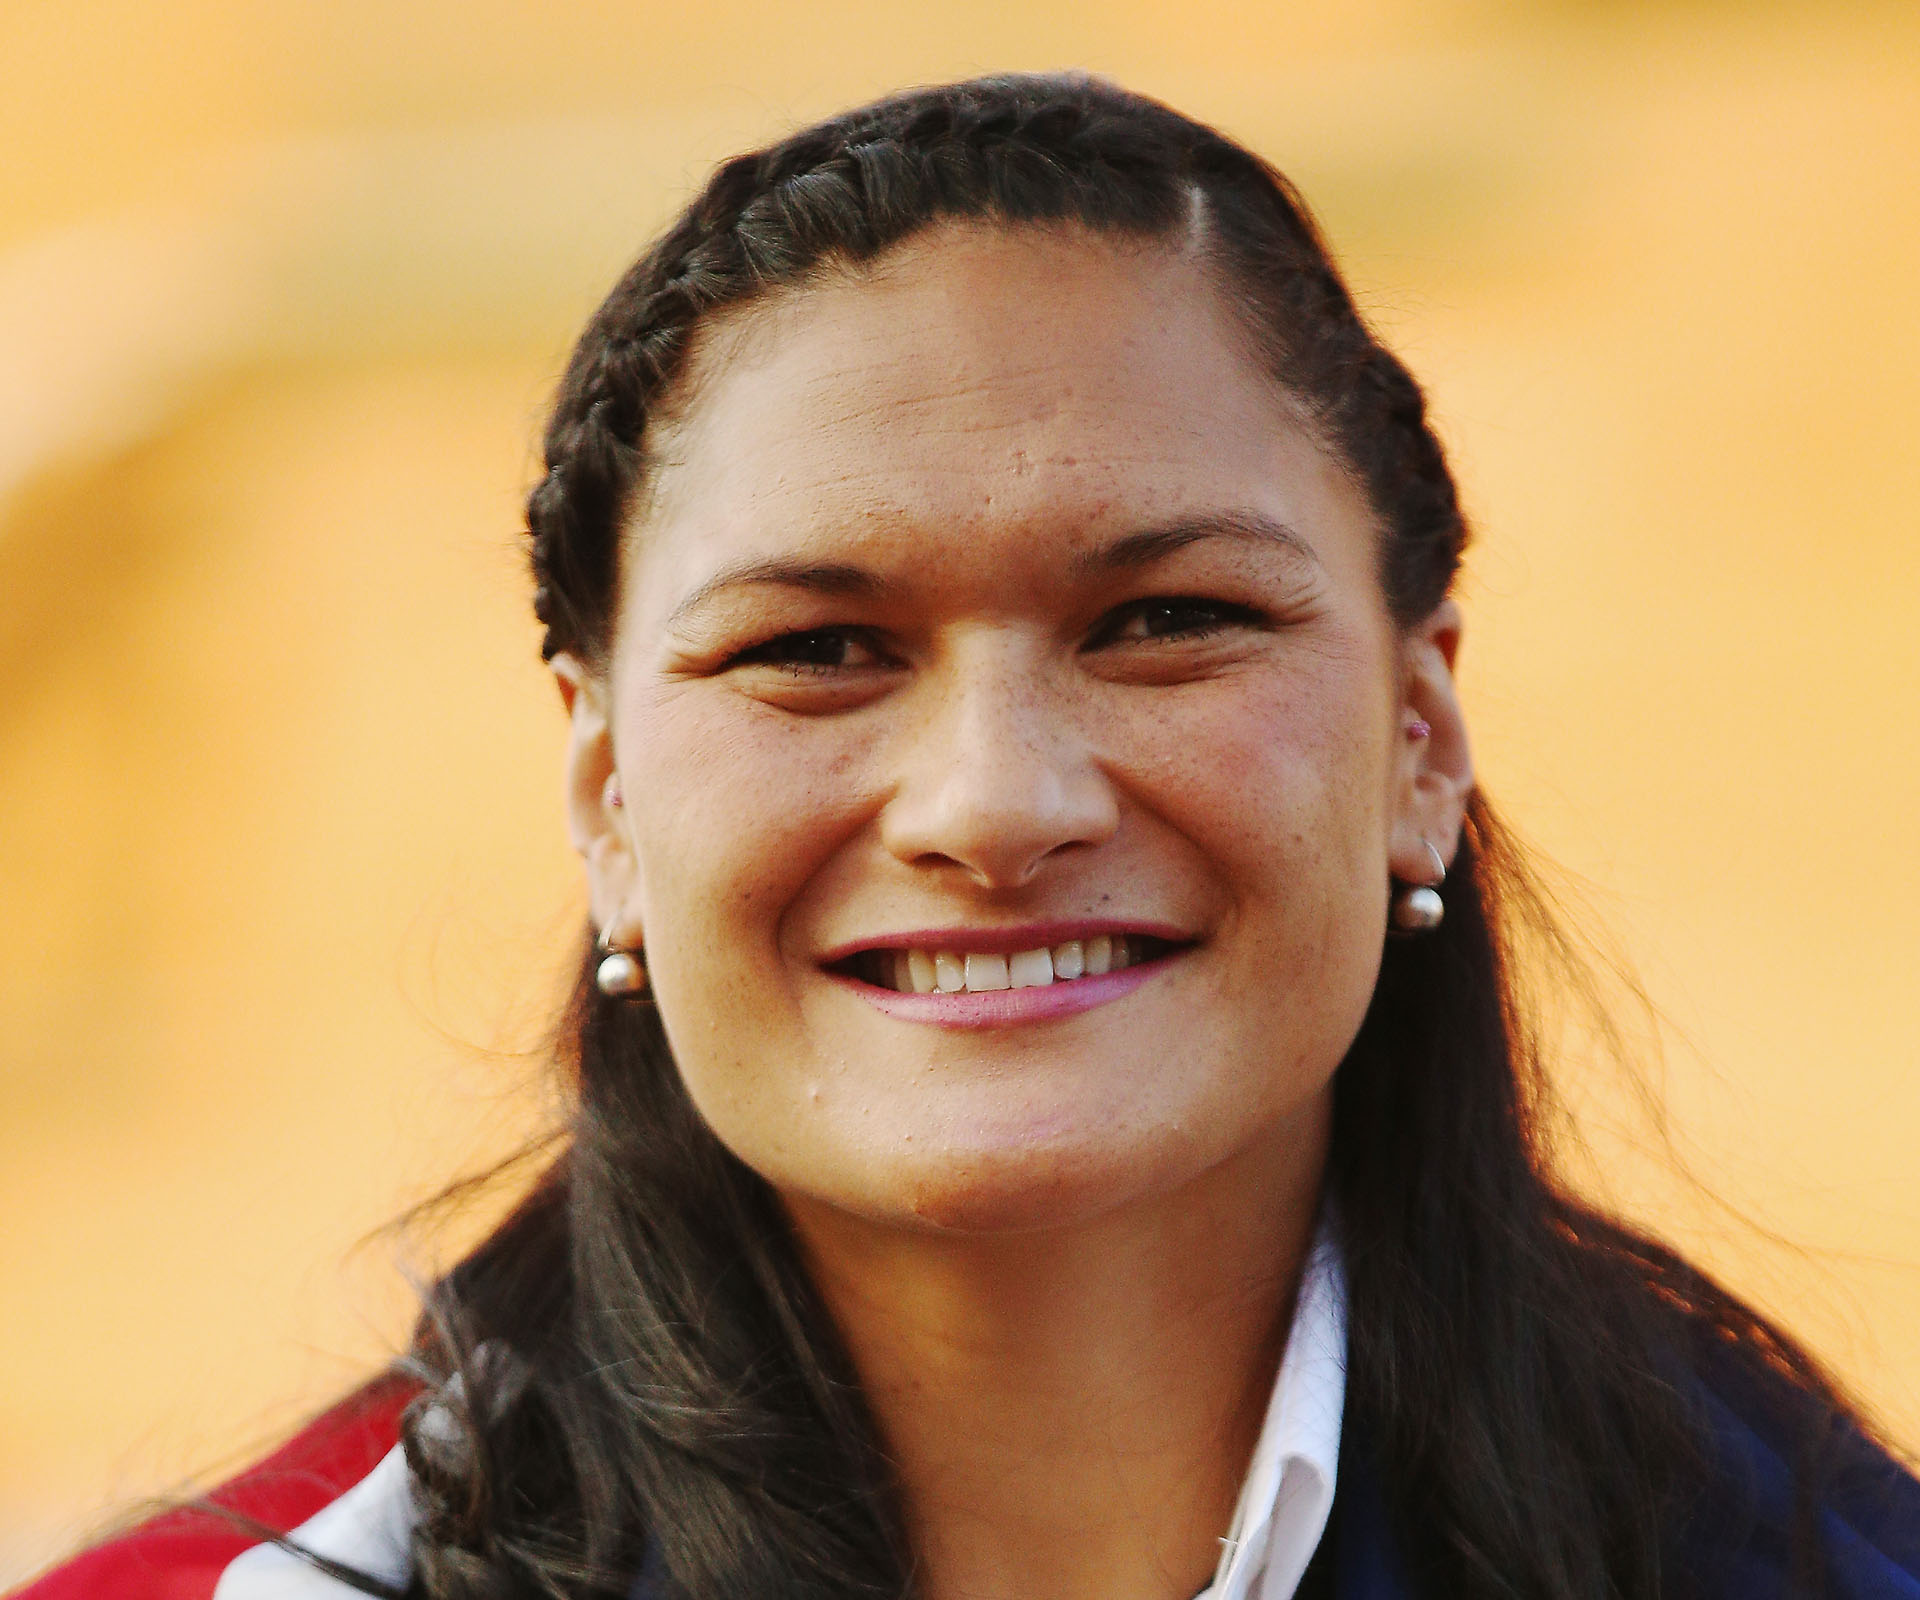 Valerie Adams baby plans are a possibility 